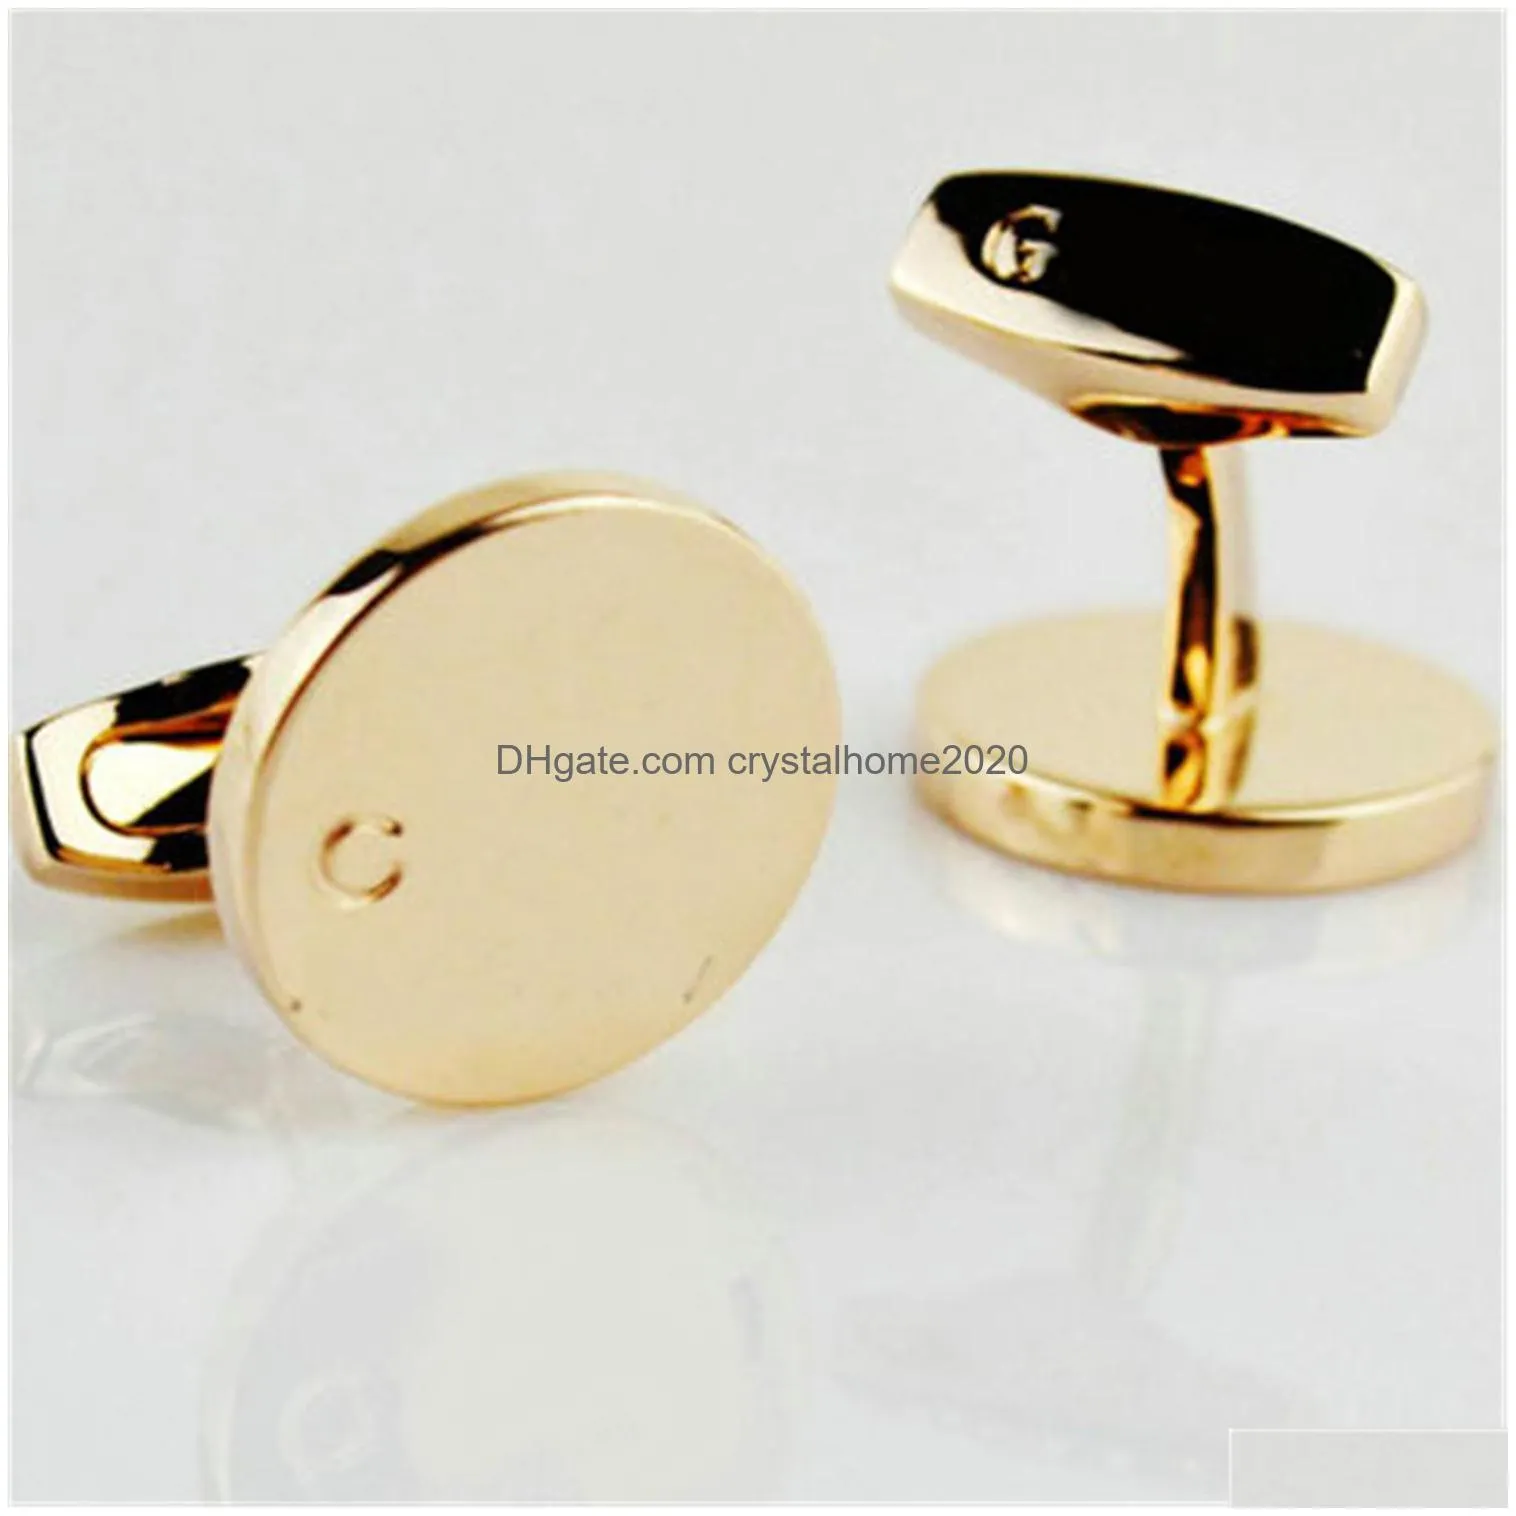 Cuff Links Luxury Designer Cuff Link Fashion Jewelry Men Classic Letters Links Shirt Accessories Wedding Gifts Cufflinks Drop Delivery Dhaxu